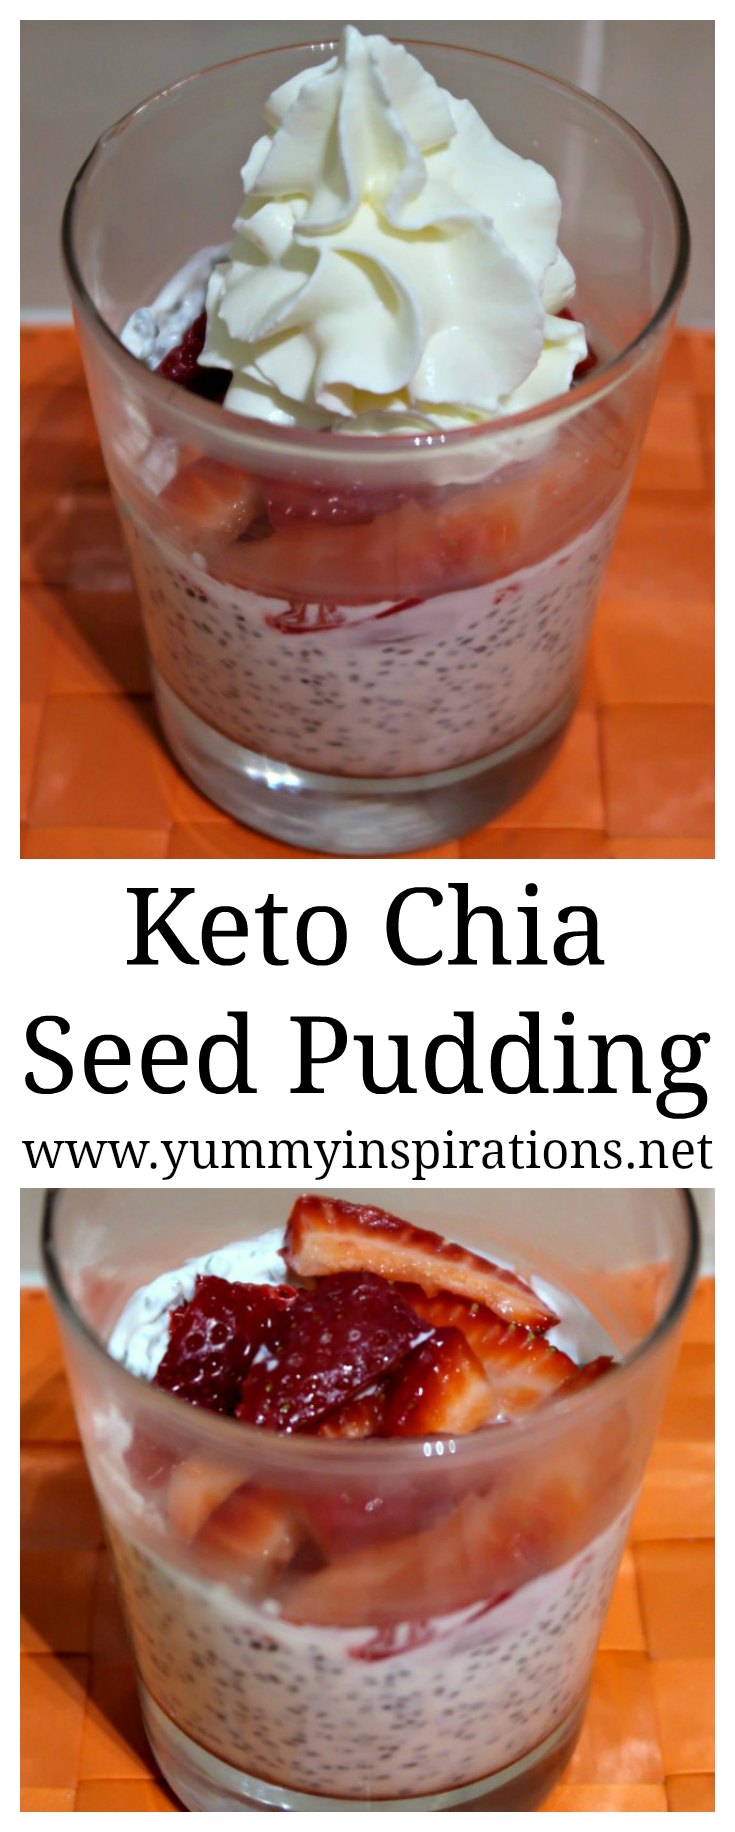 chia keto pudding recipes recipe breakfast carb low seeds yummyinspirations cream heavy coconut milk vanilla using diet friendly subscribe subscriber